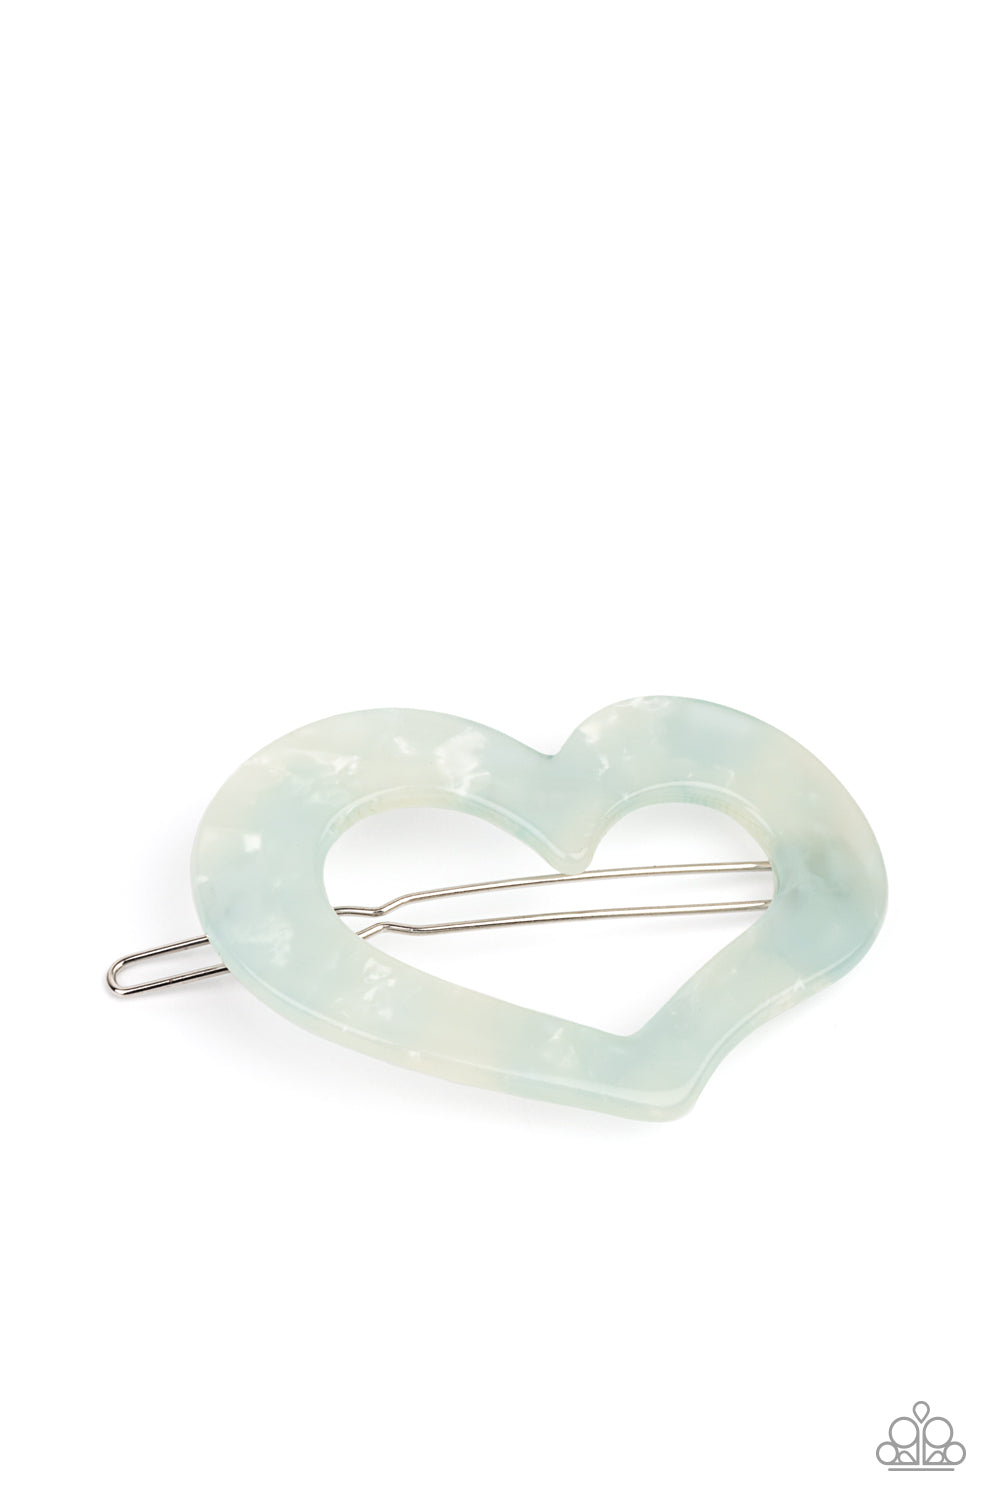 HEART Not to Love - Blue Hair Clip - Paparazzi Accessories